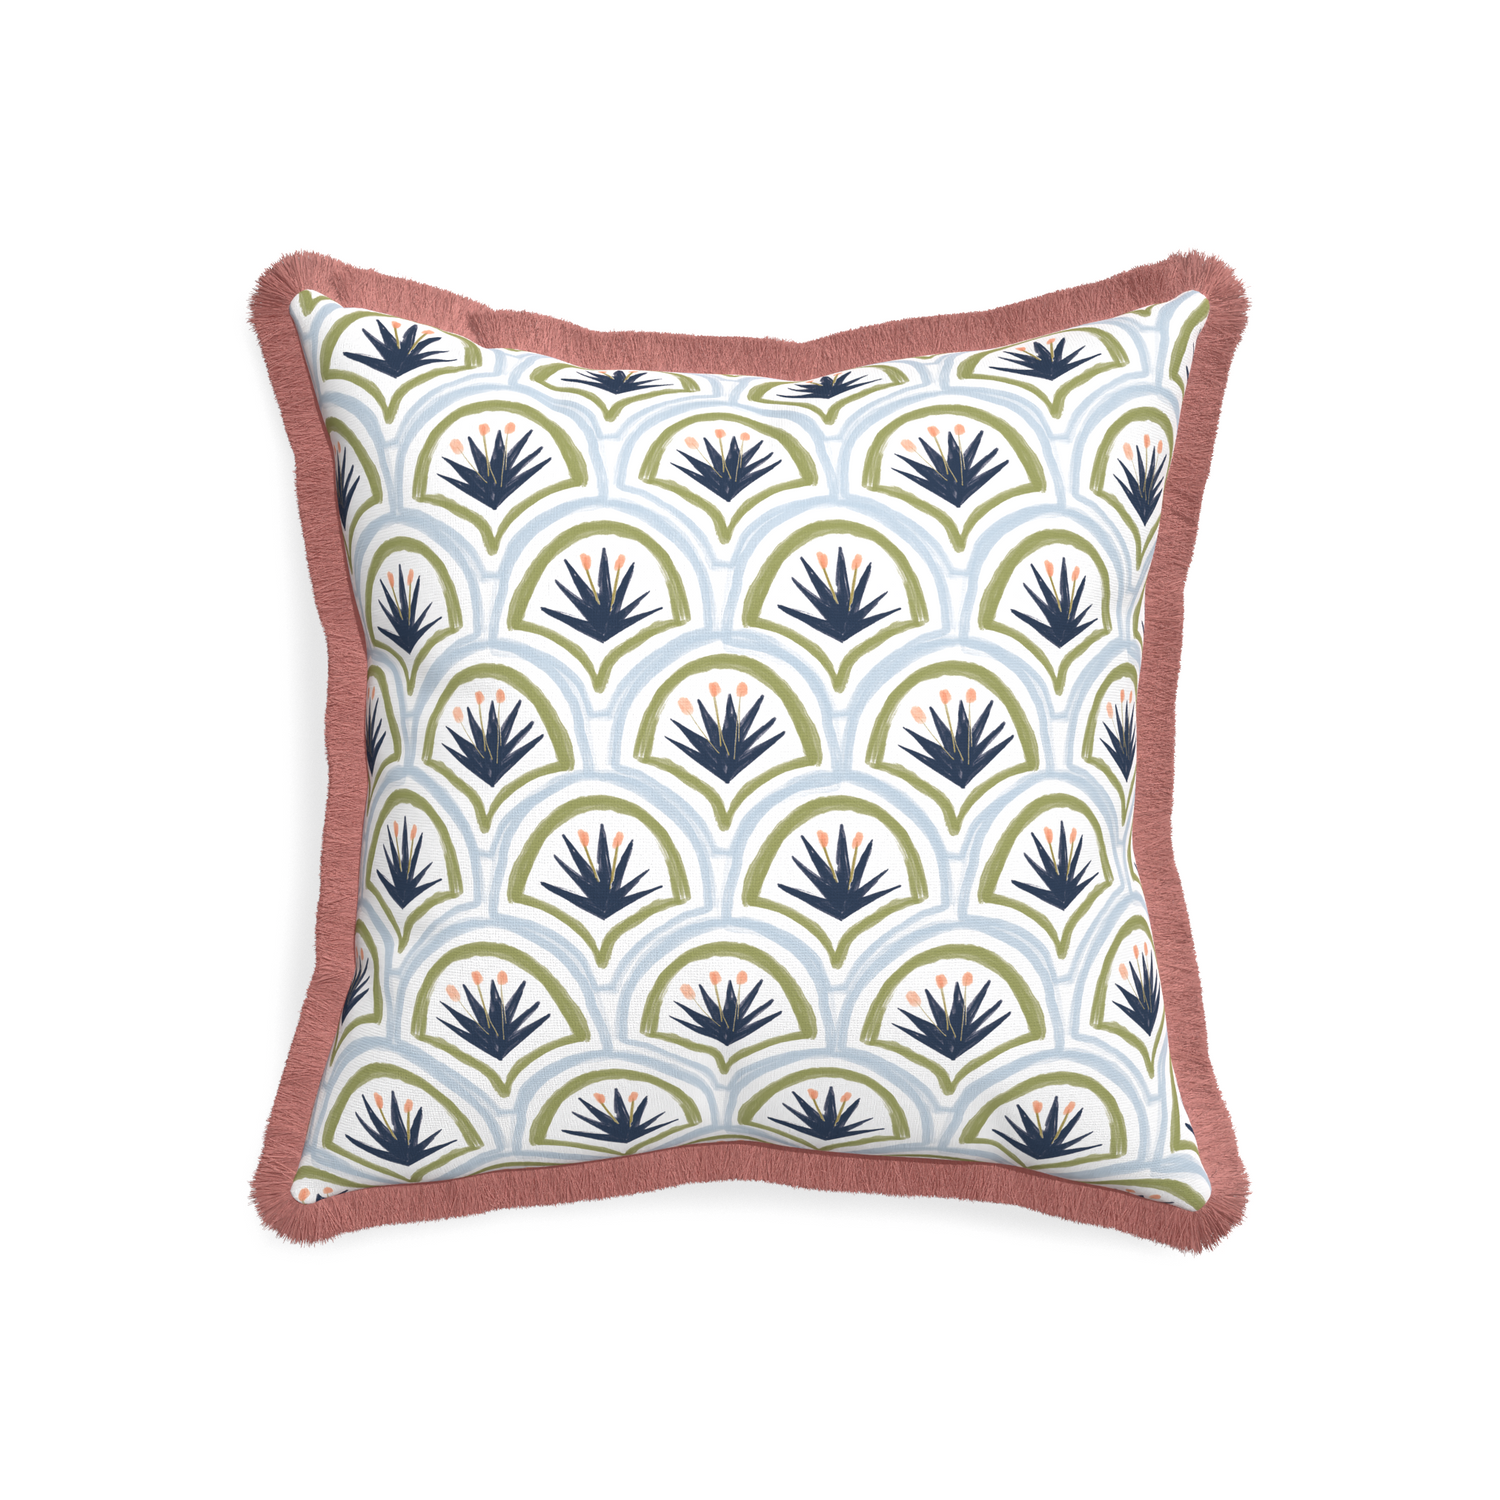 20-square thatcher midnight custom art deco palm patternpillow with d fringe on white background